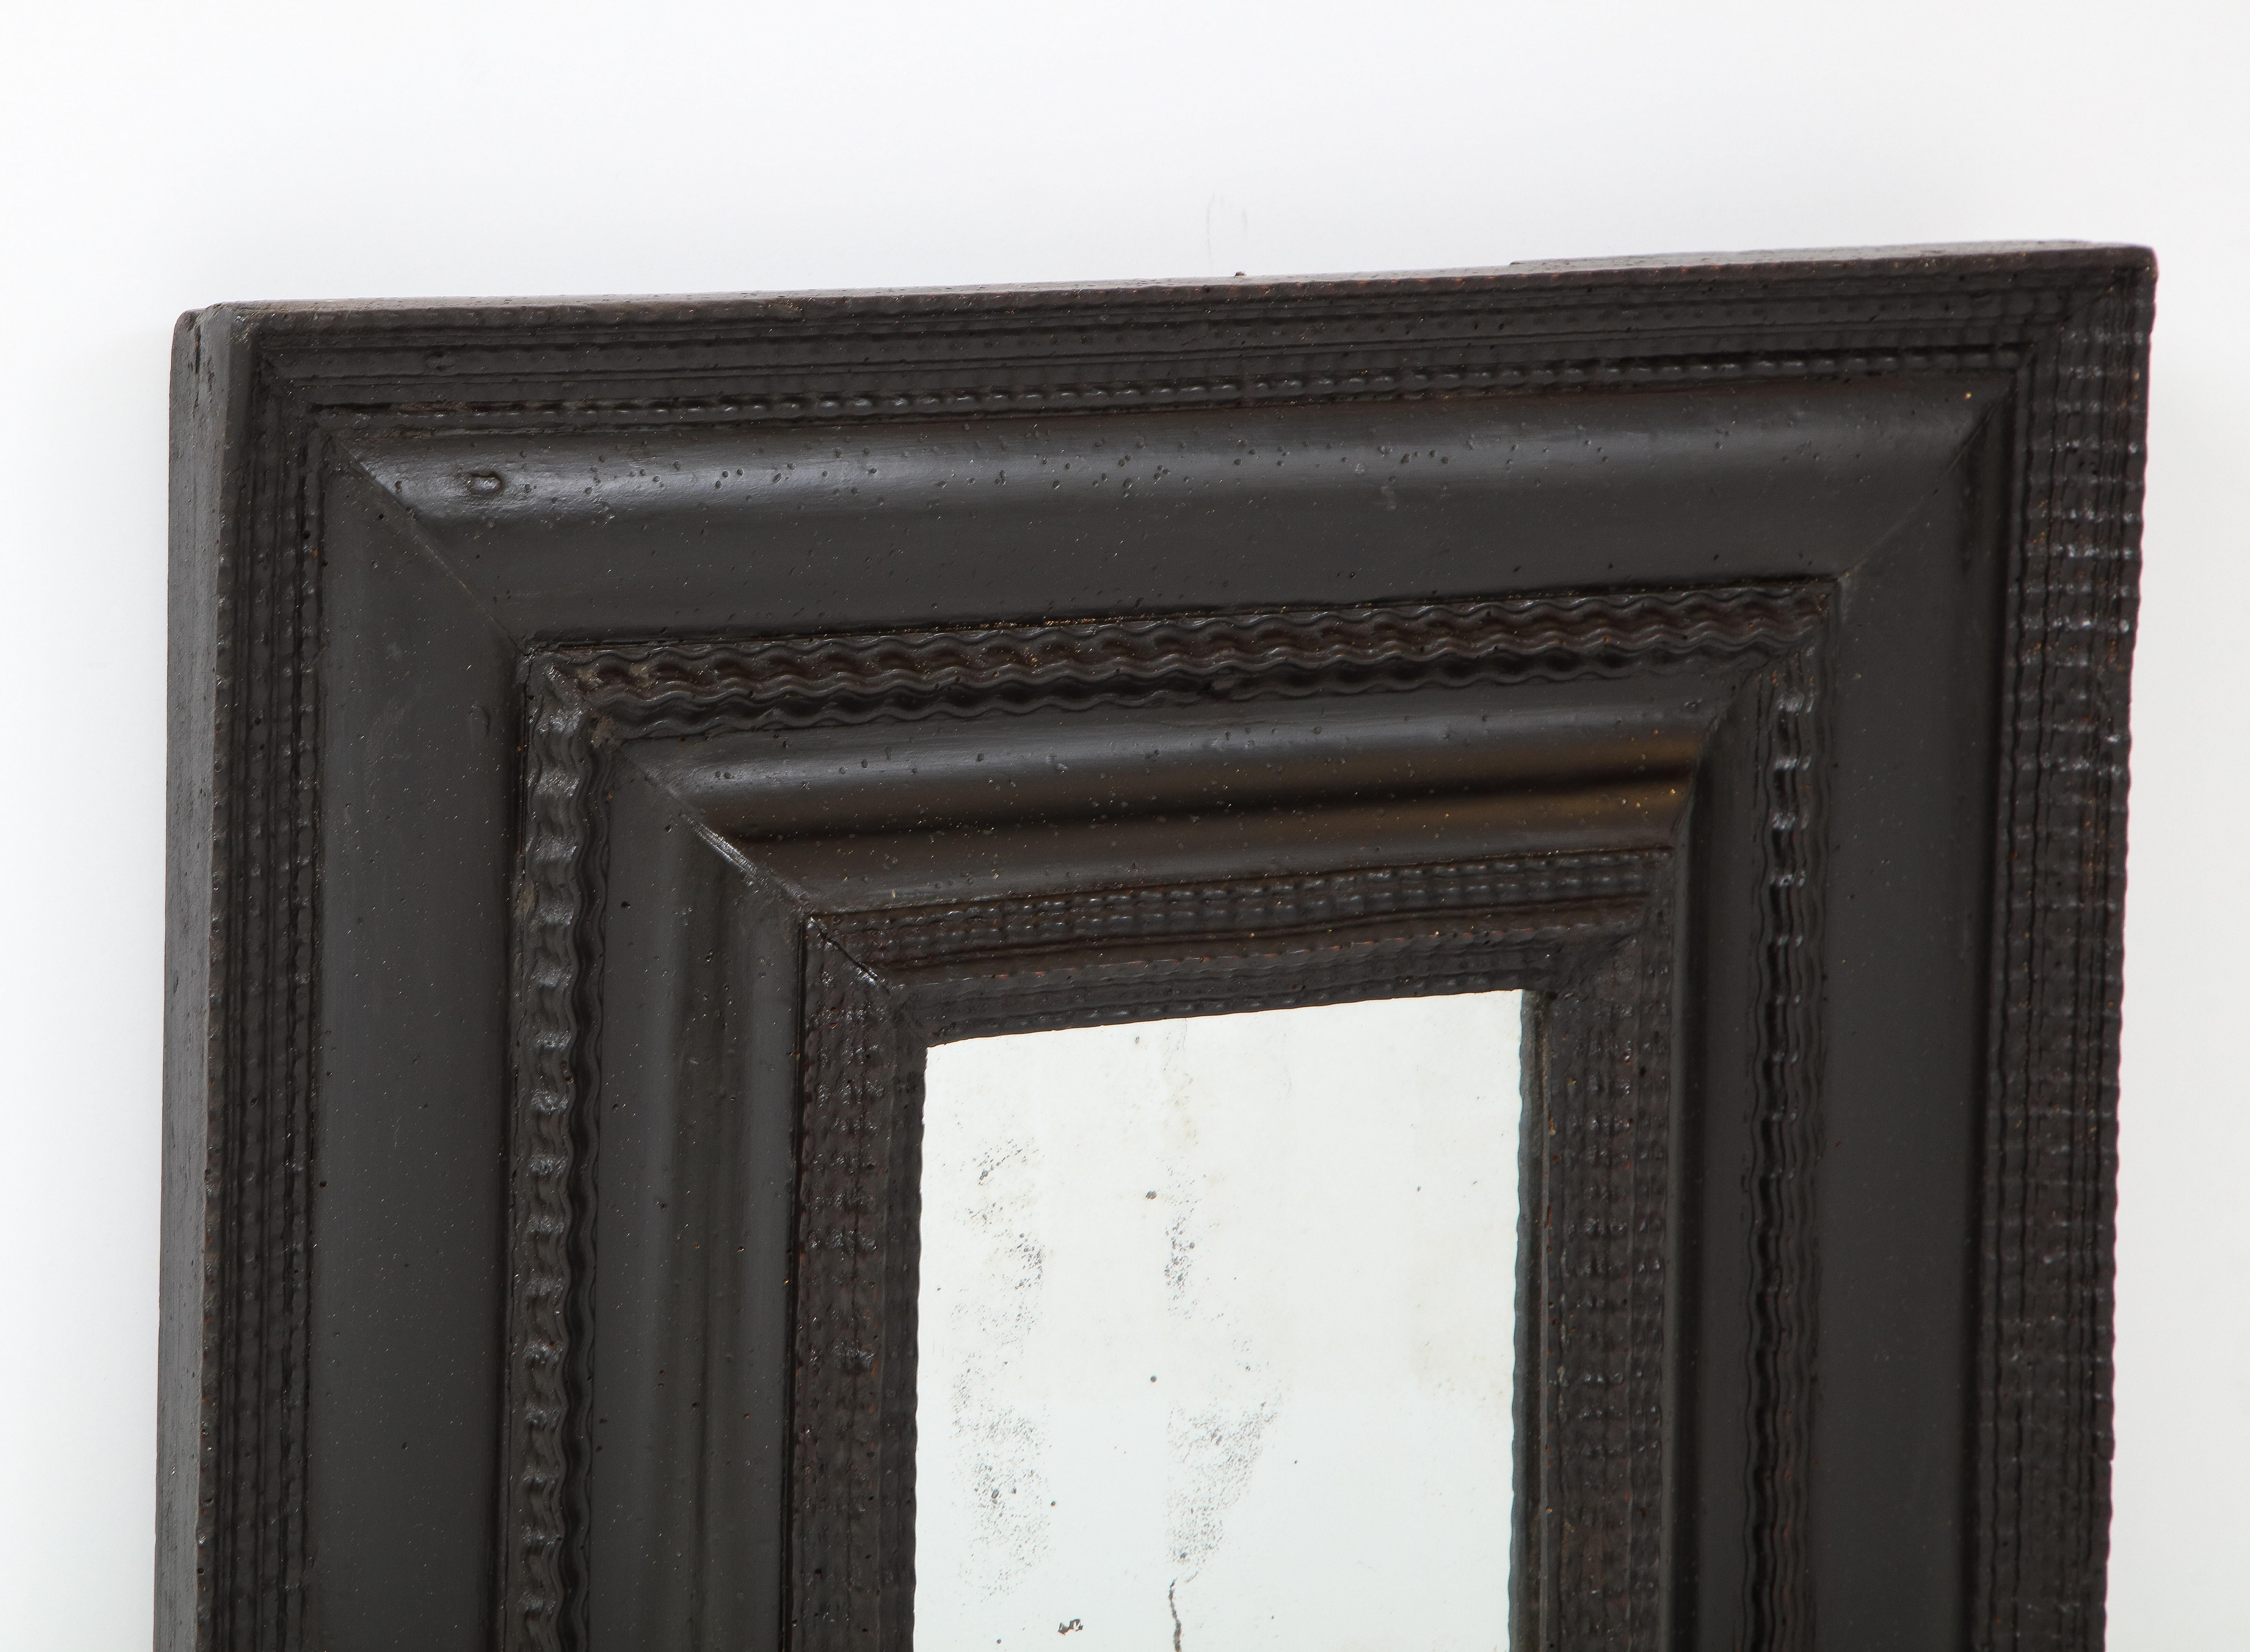 Italian Baroque Ebonized Walnut Guilloché Frame, Inset with Old Mercury Glass In Good Condition For Sale In New York, NY